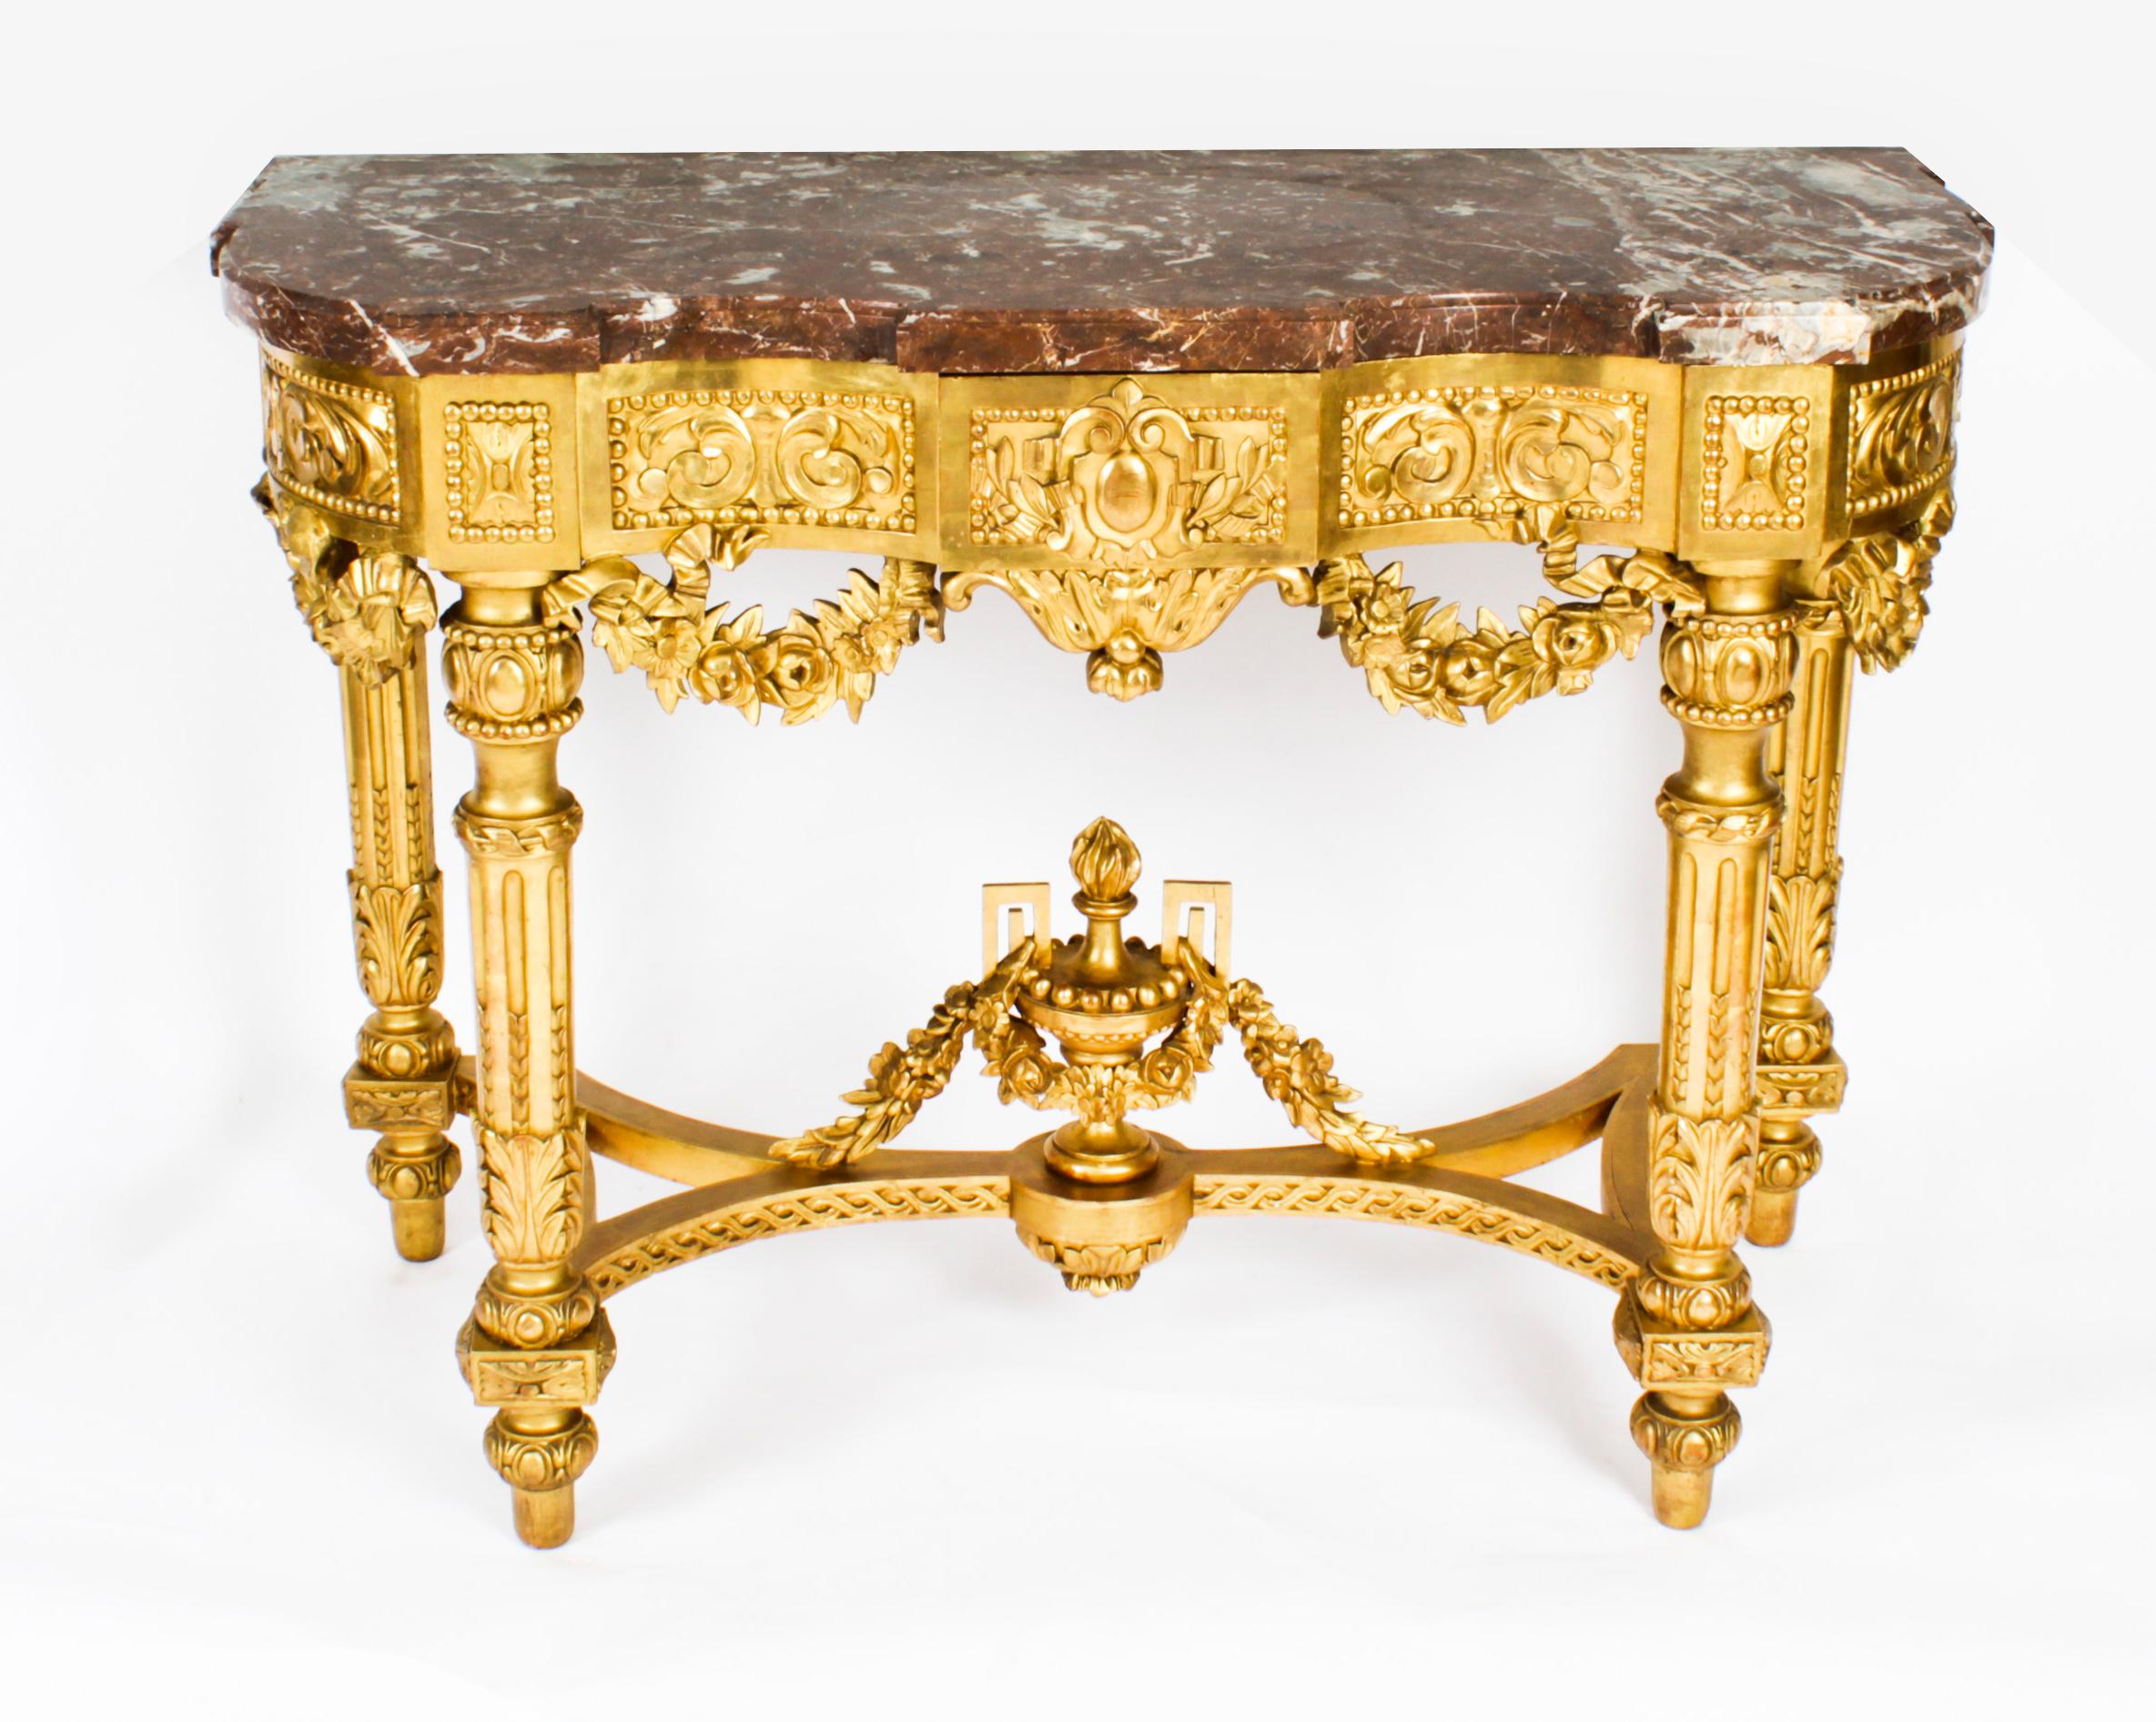 A fine antique Louis XV Revival carved giltwood marble topped console table, circa 1870 in date.
 
This finely carved giltwood console table is surmounted with an exquisite shaped rectangular Rouge de Rance marble top above a frieze carved with